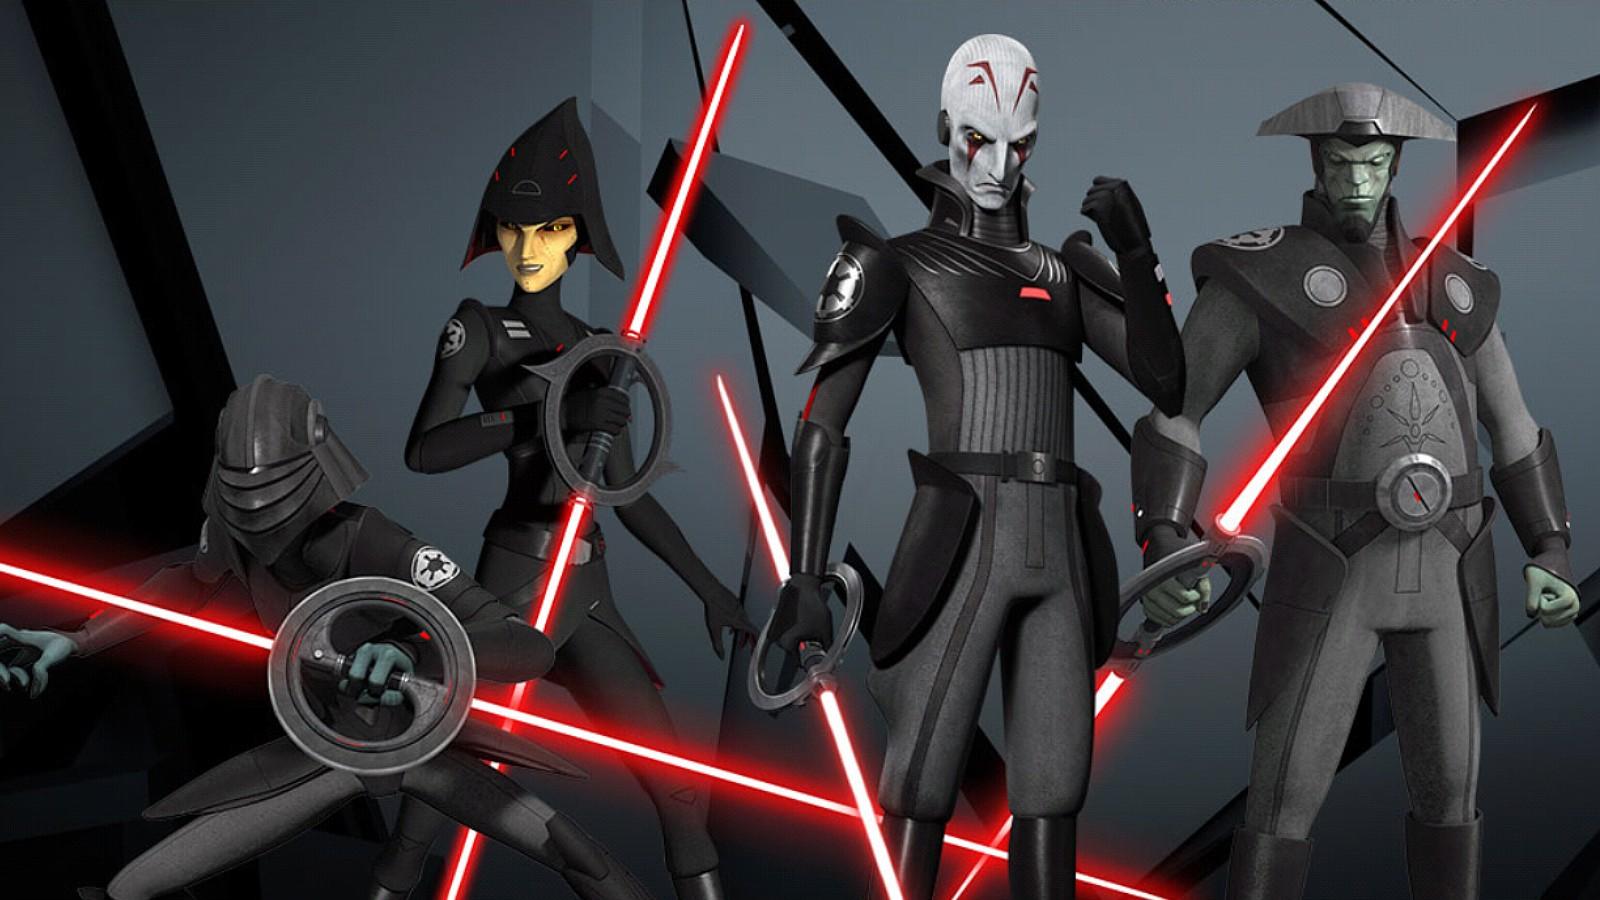 The Inquisitors in Star Wars Rebels